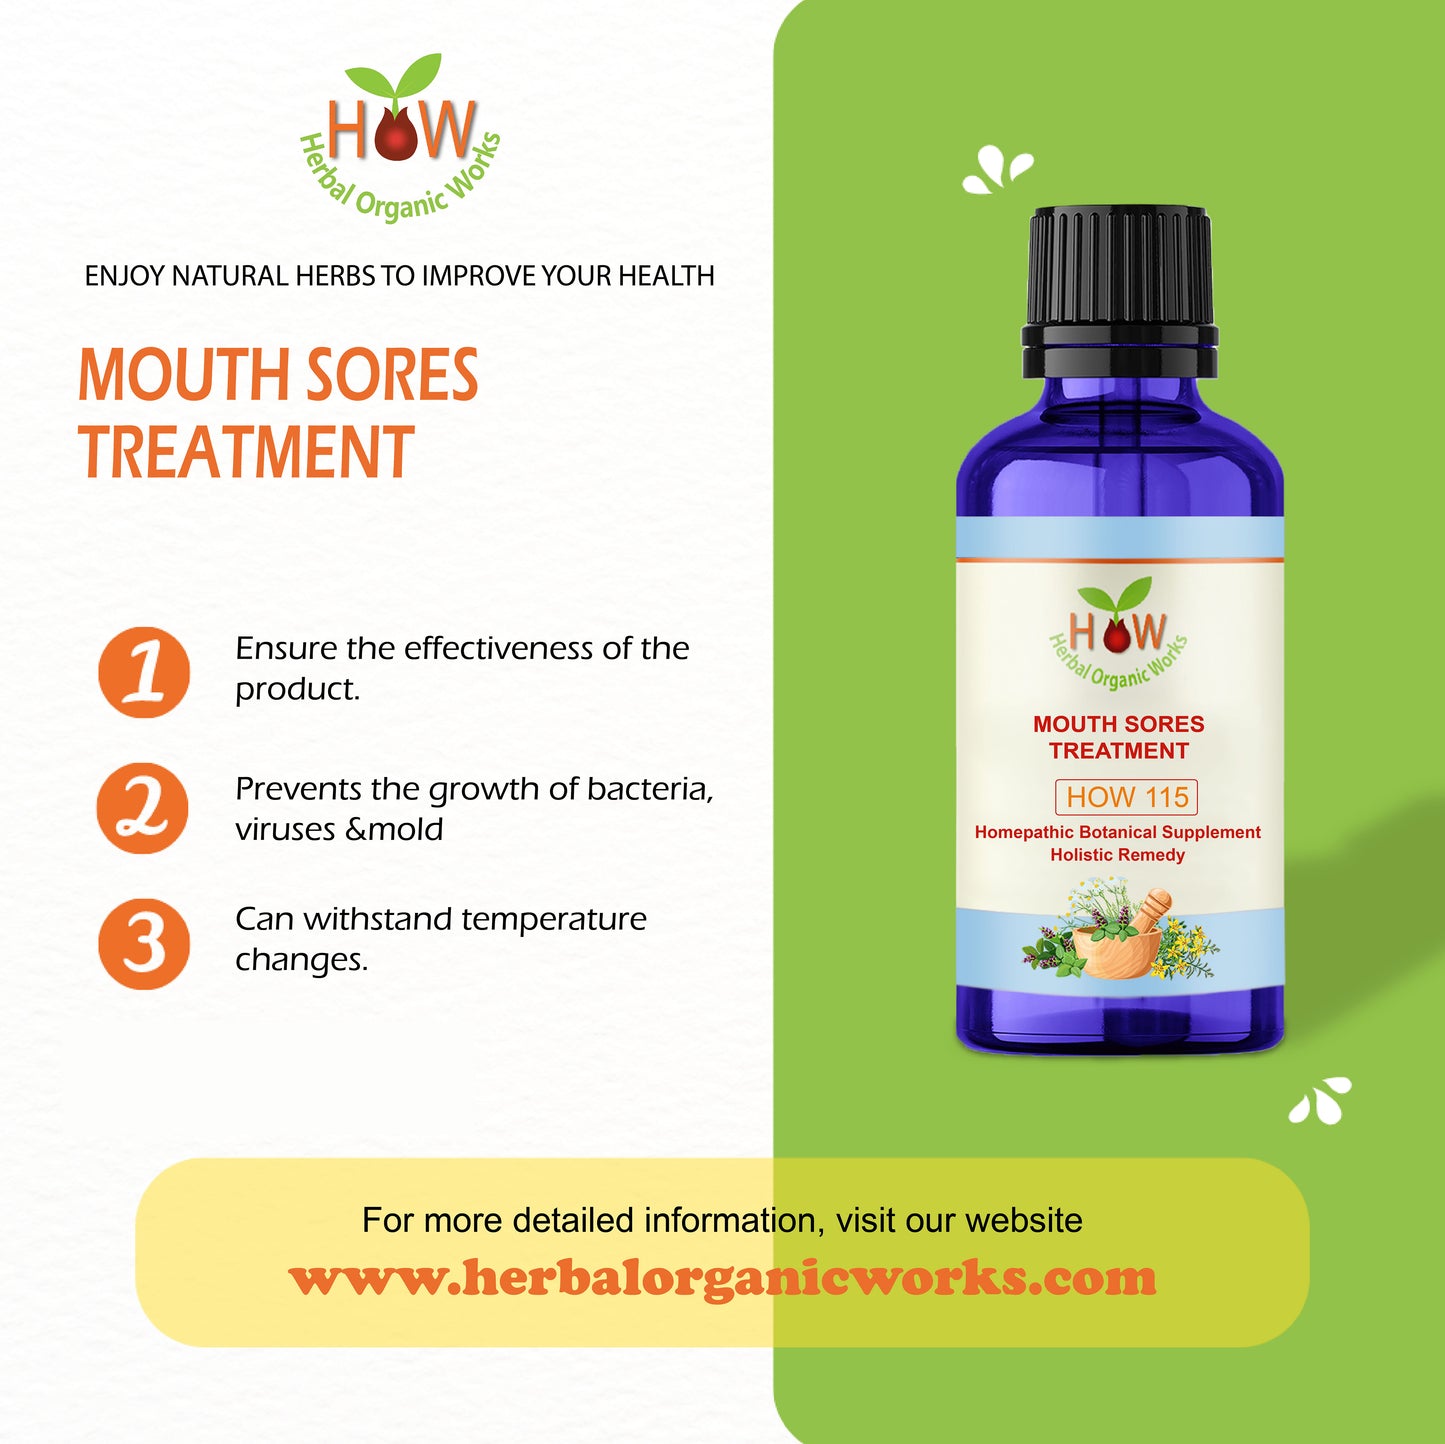 MOUTH SORES TREATEMENT (HOW115)